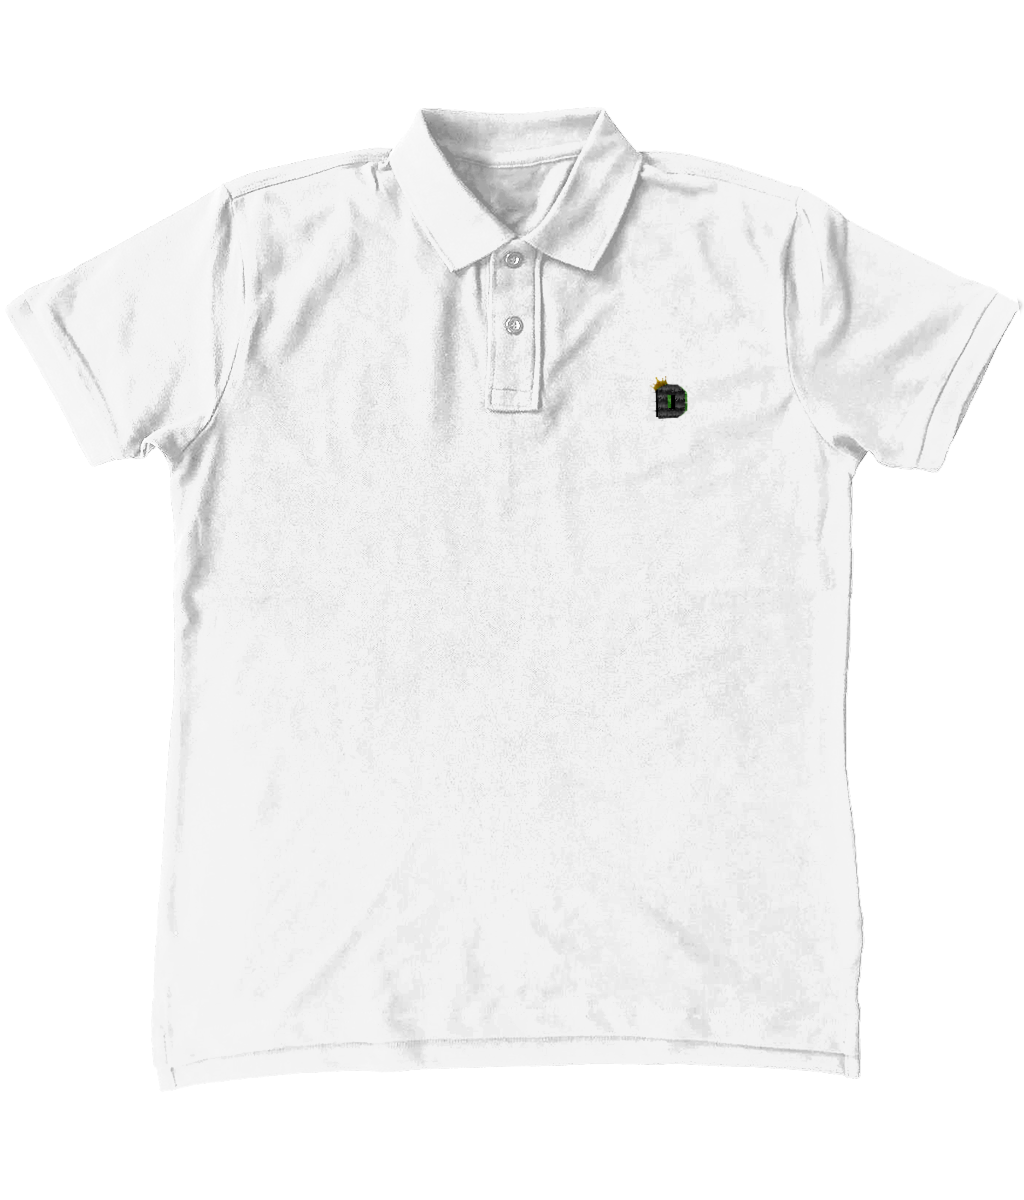 The King D42 Embroidered Polo Shirt